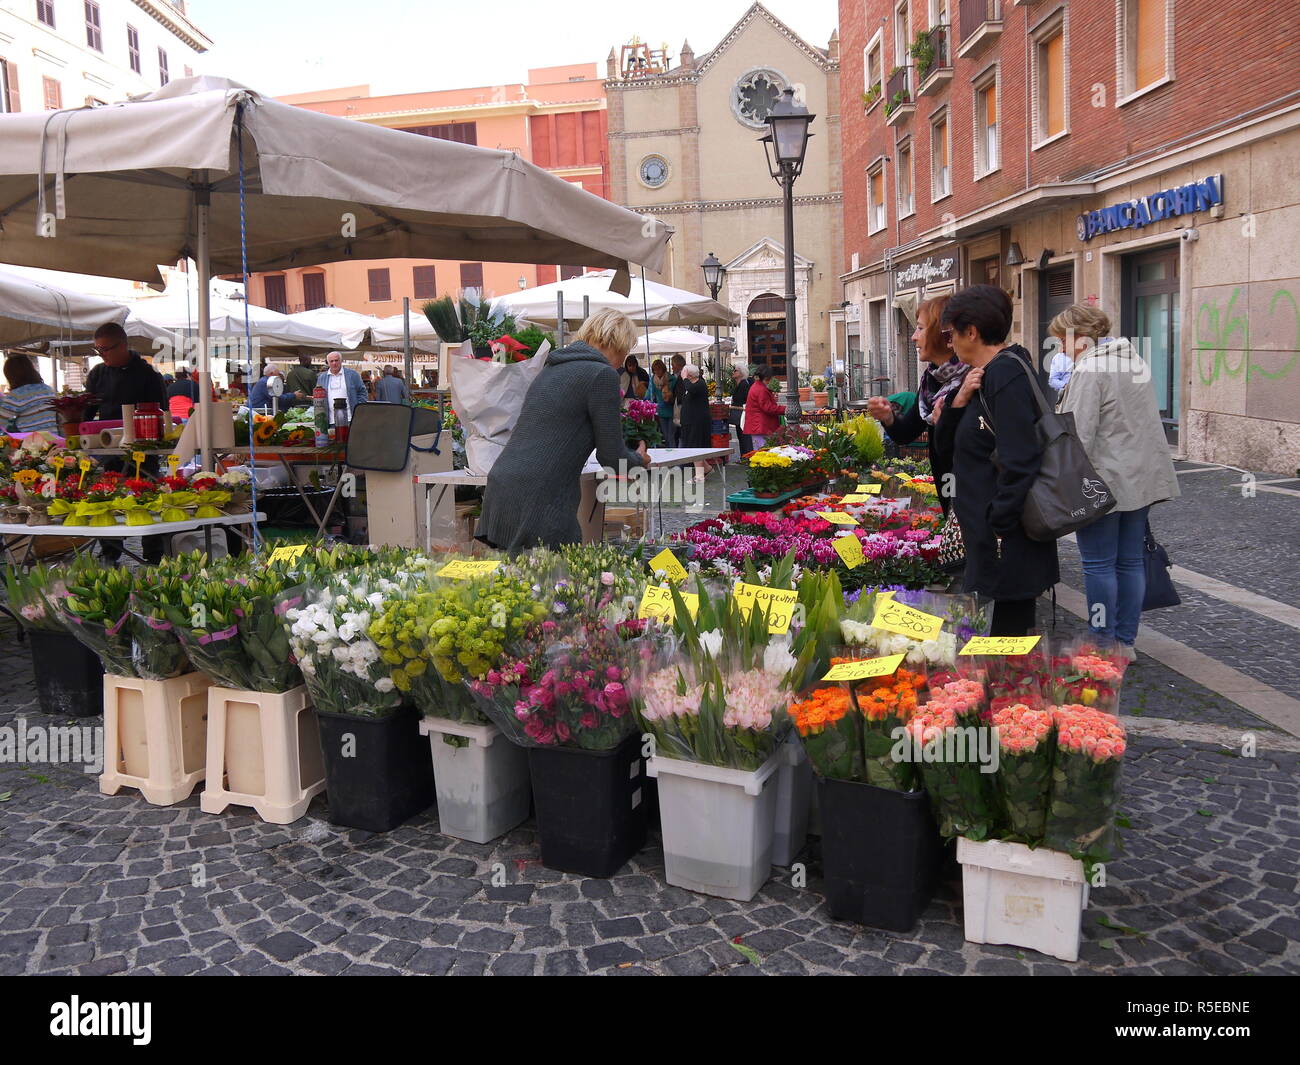 TIVOLI, ITALY - SEPTEMBER 29, 2017: Fresh and beautiful flowers, fruits and vegetables at the farmer market in the main square Piazza Plebiscito of Ti Stock Photo